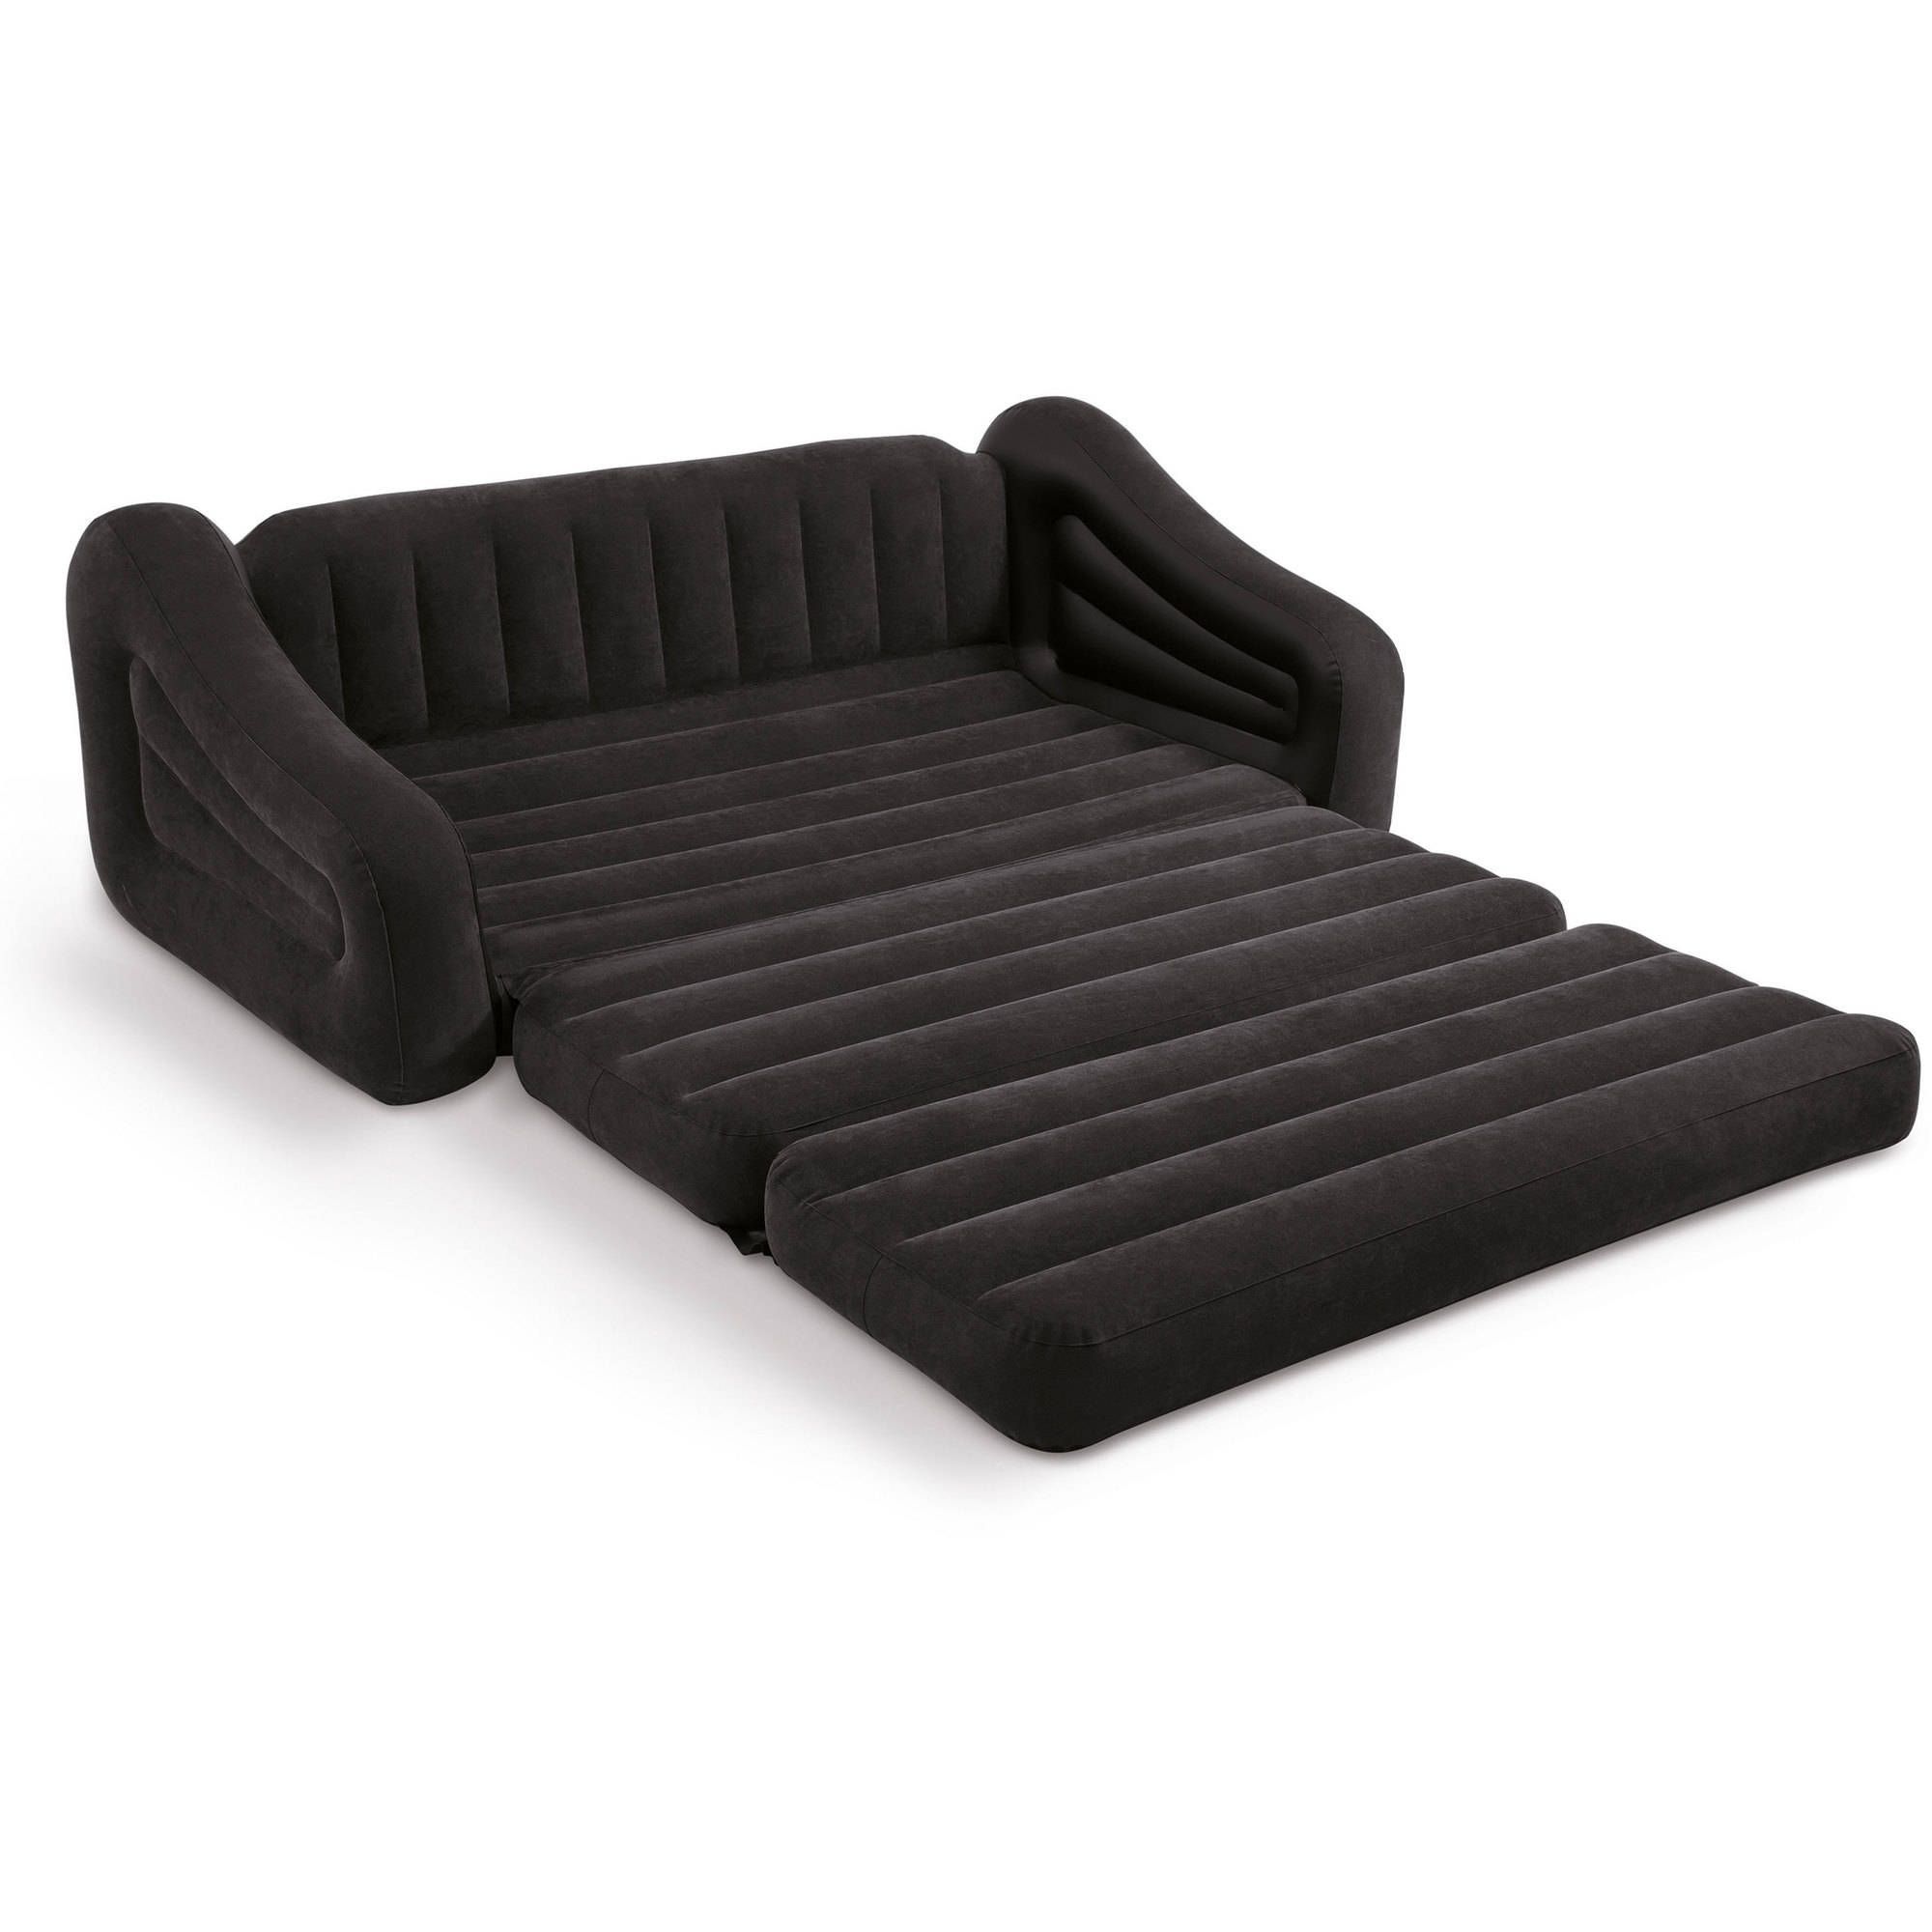 Pull Out Sofa Chairs Inside Trendy Intex Queen Inflatable Pull Out Sofa Bed – Walmart (View 13 of 15)